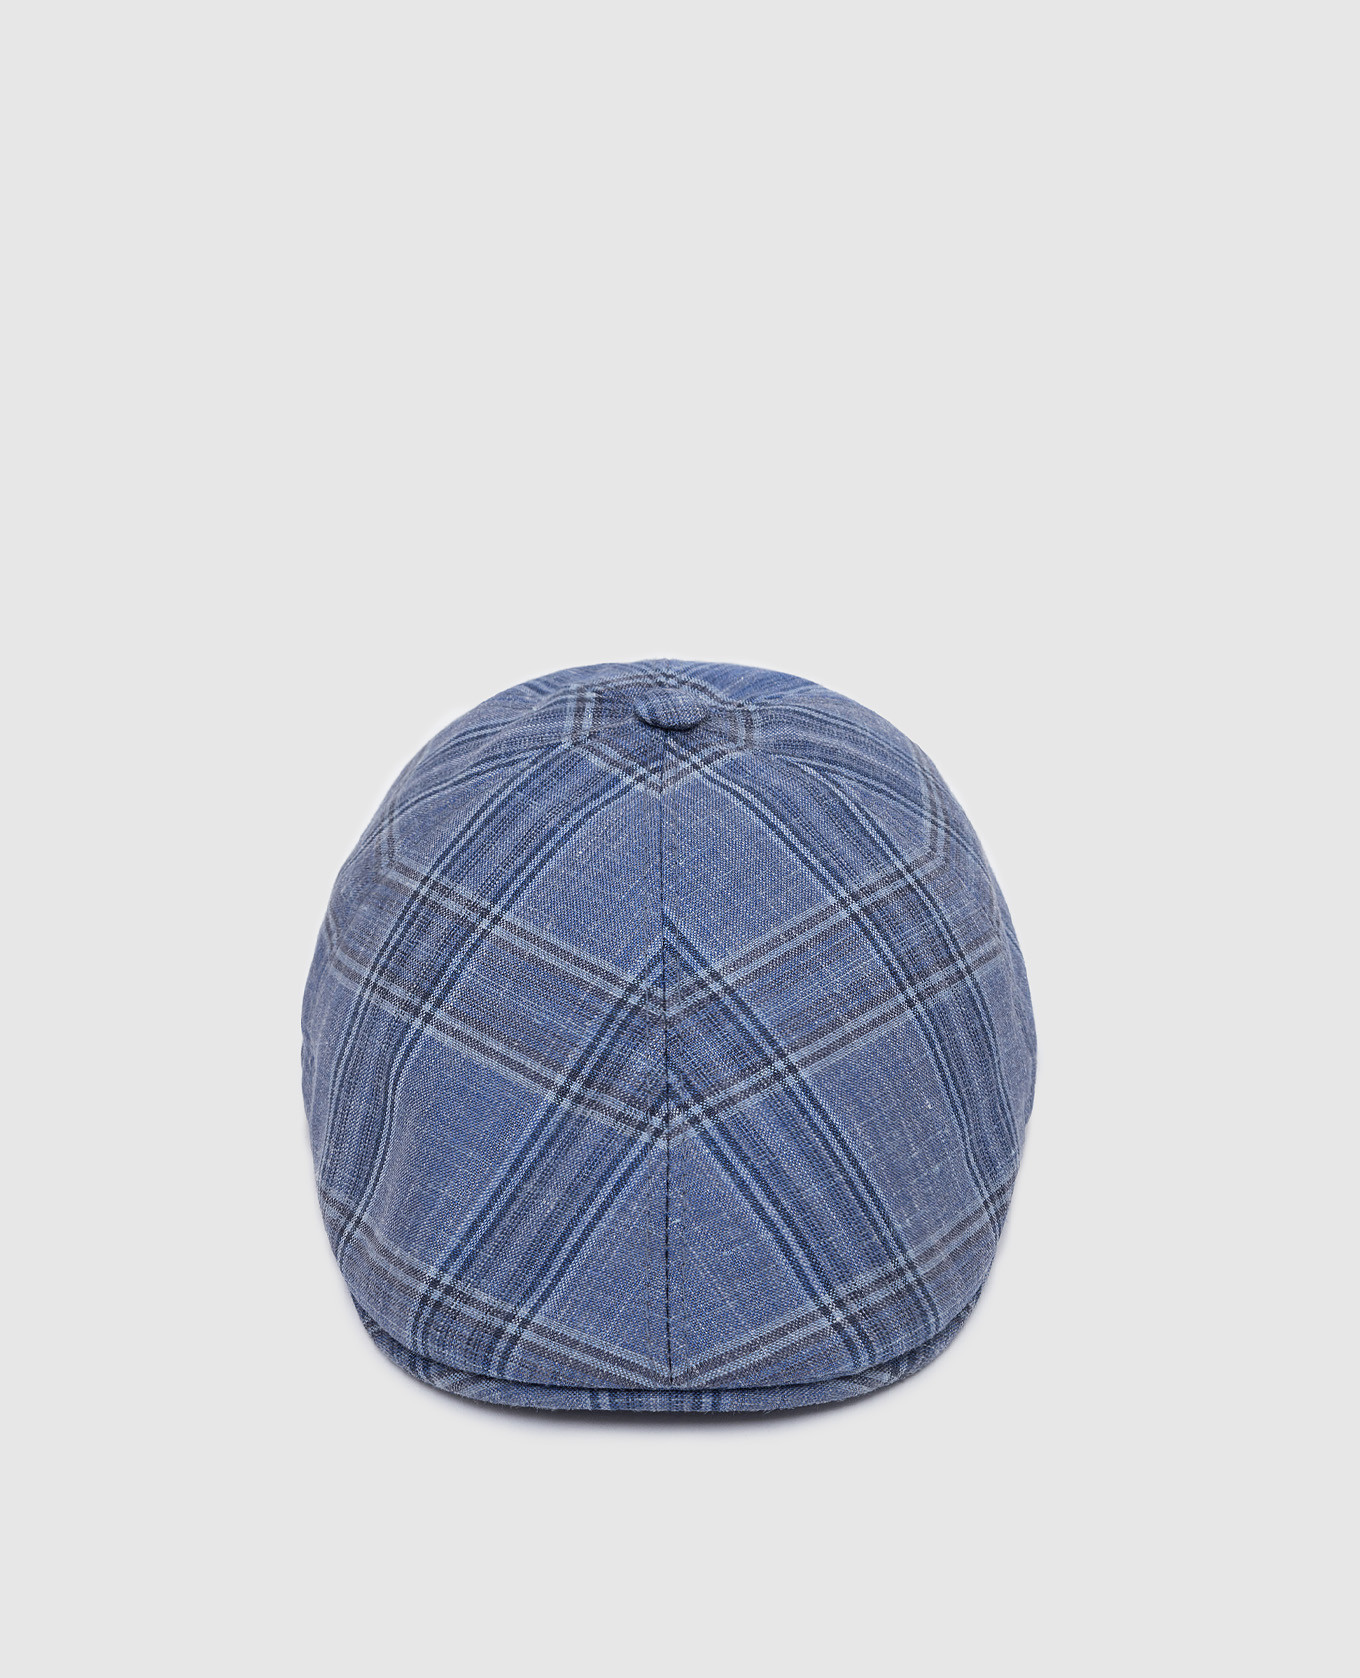 Patterned wool, silk and linen baby cap